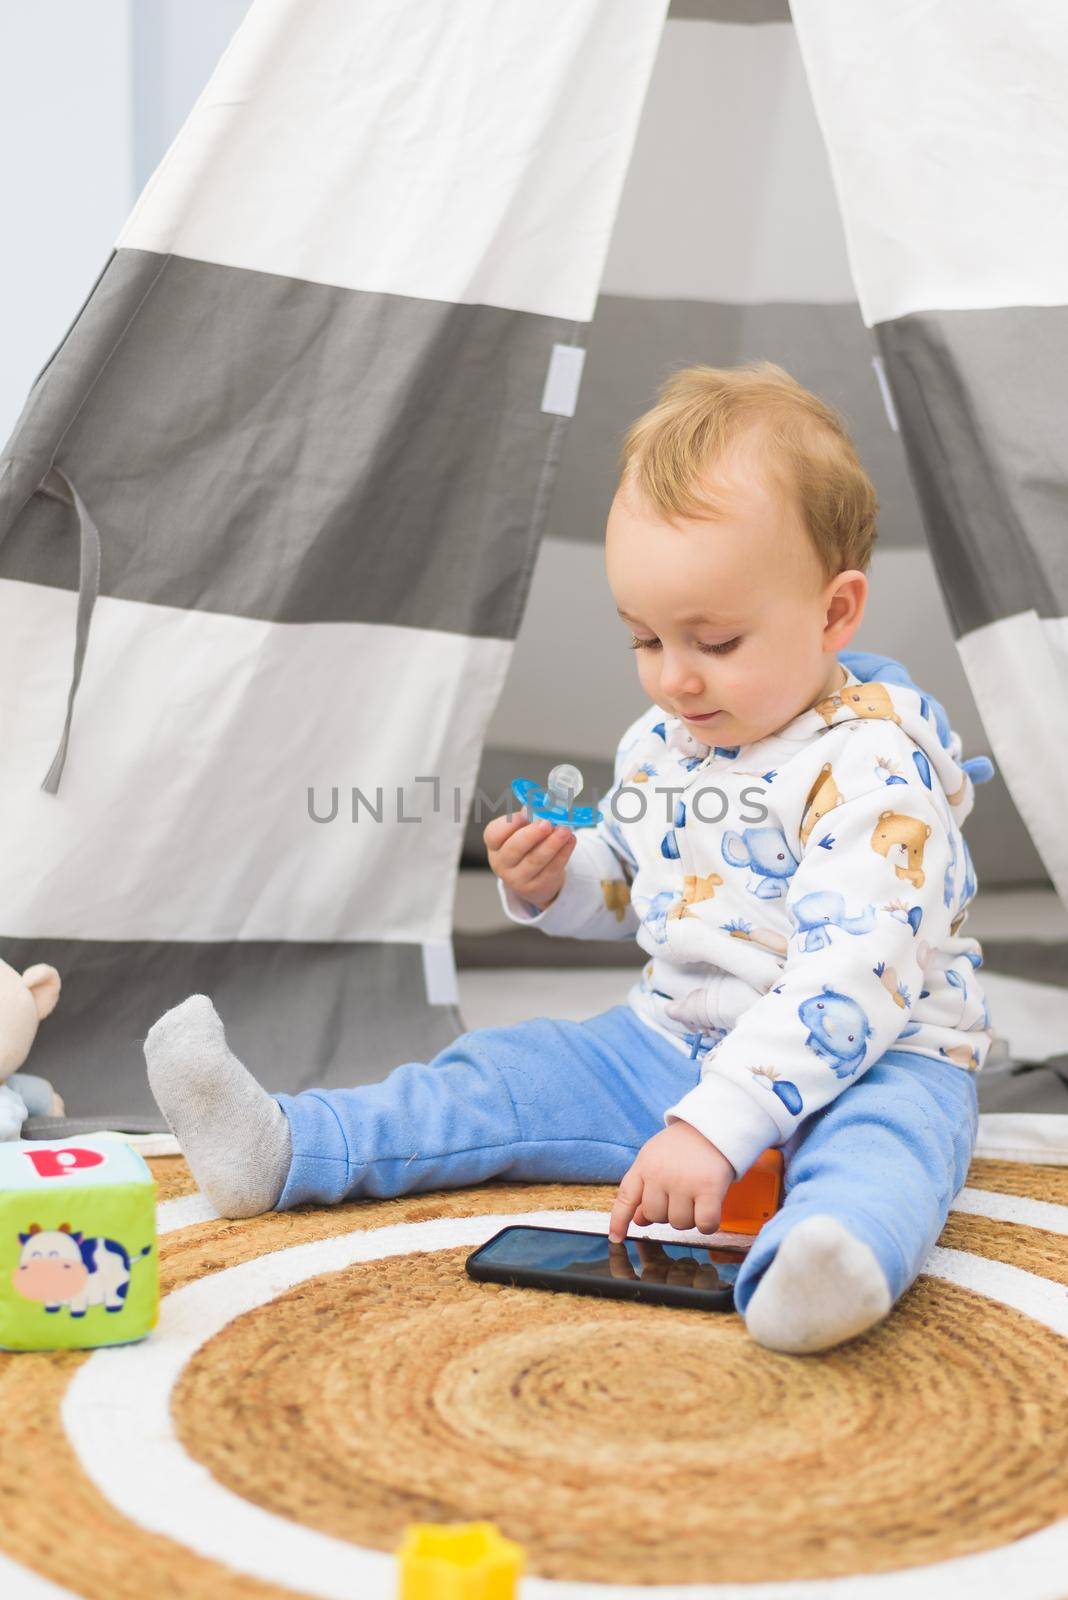 baby playing in his room with his toys and looking at the mobile phone by jcdiazhidalgo